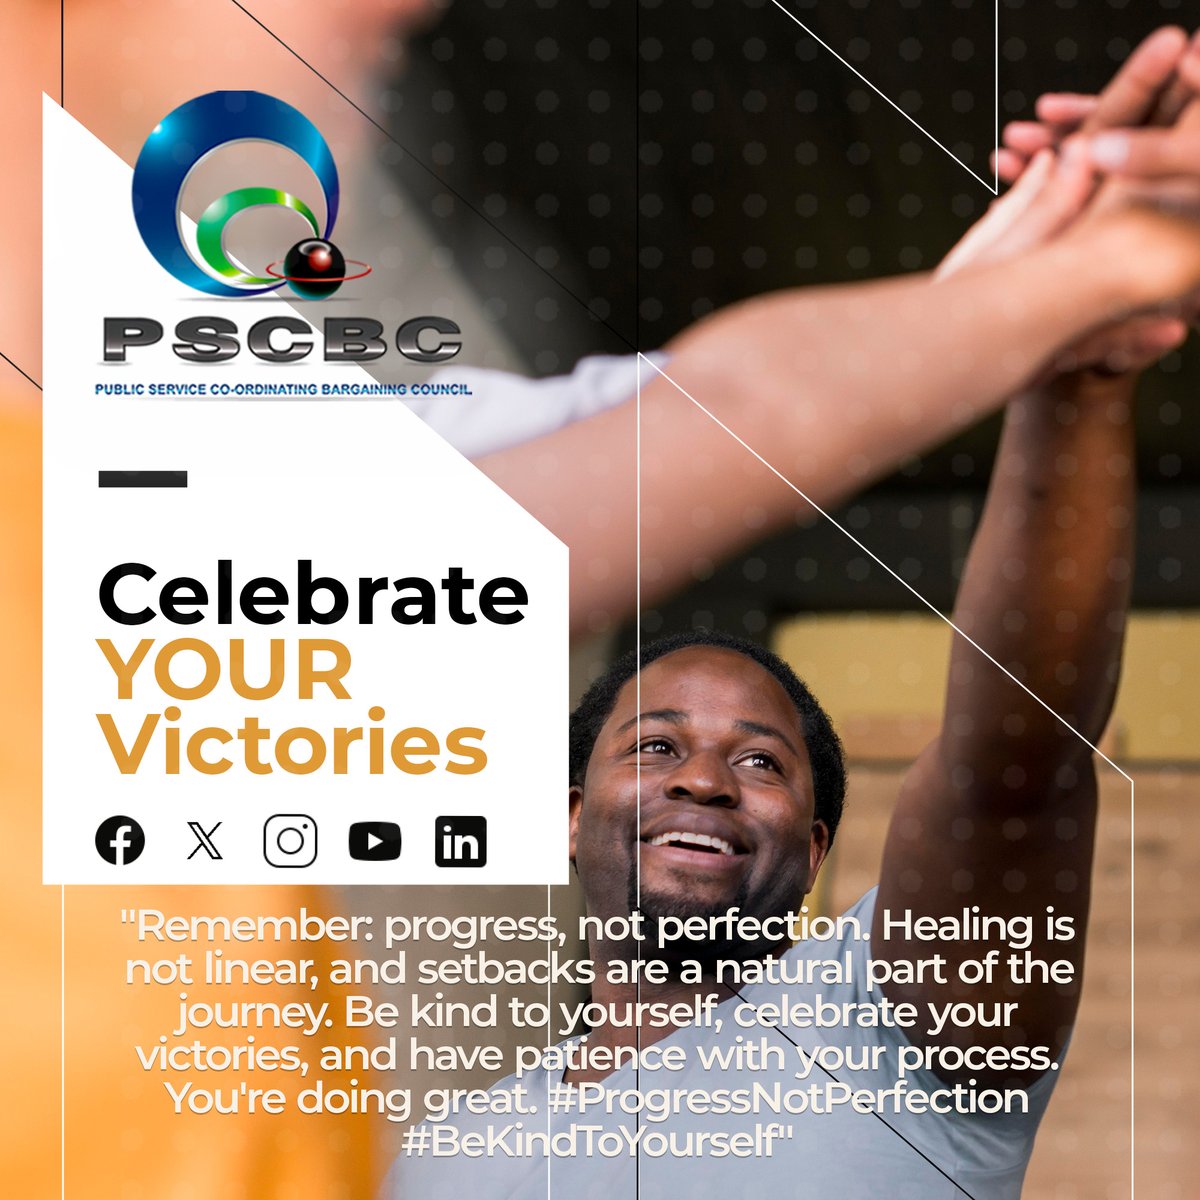 'Remember: progress, not perfection. Healing is not linear, and setbacks are a natural part of the journey. Be kind to yourself, celebrate your victories, and have patience with your process. You're doing great. #ProgressNotPerfection #BeKindToYourself' #PSCBC